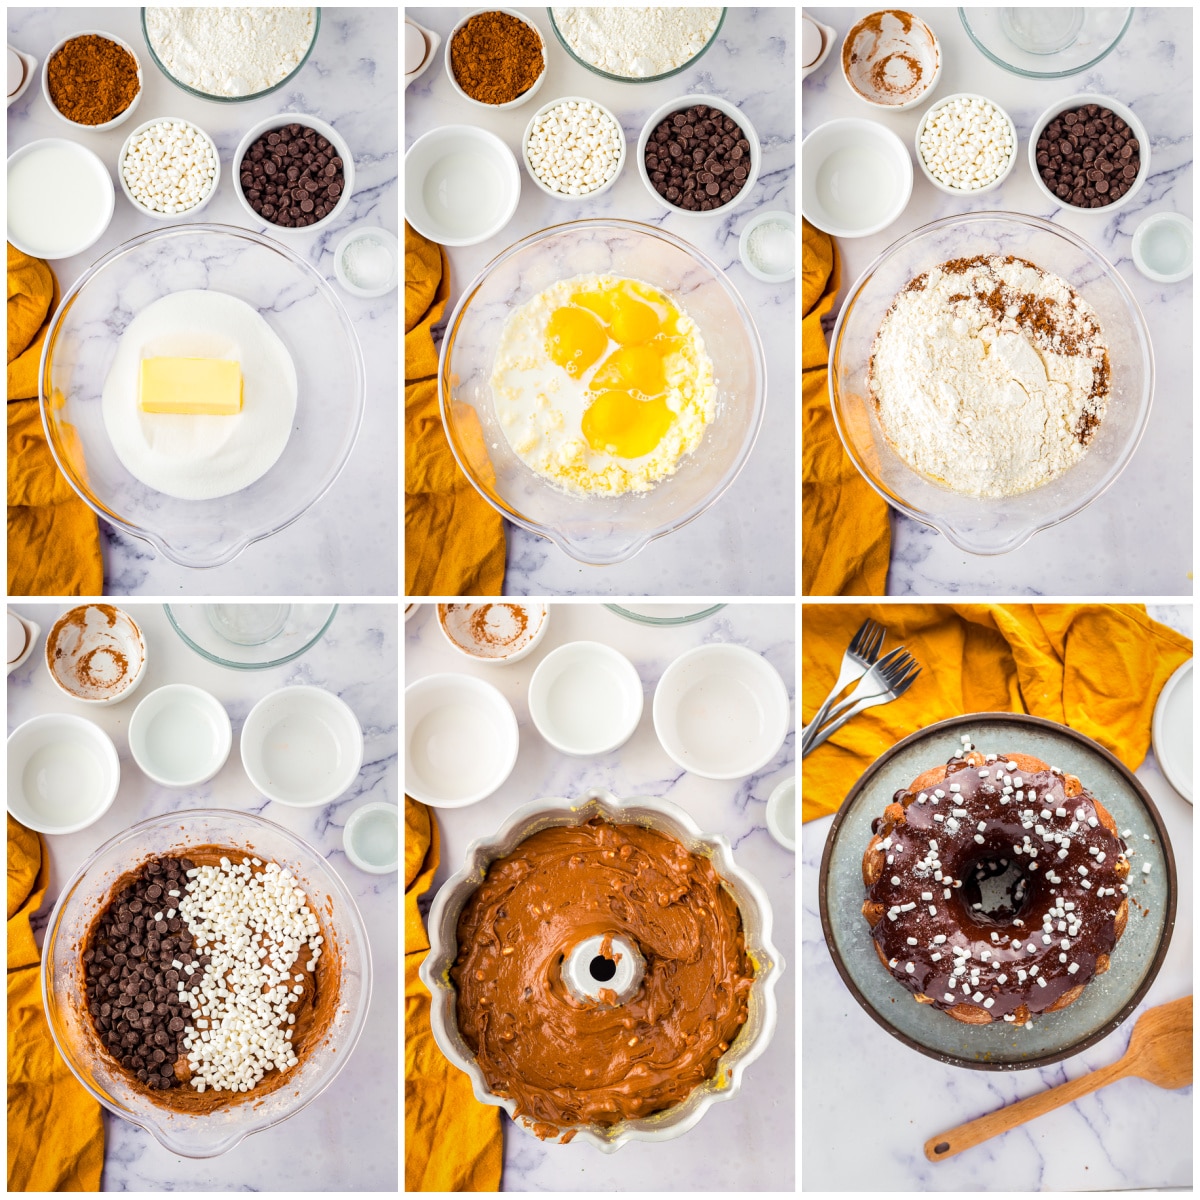 Step by step photos on how to make a Hot Chocolate Cake.